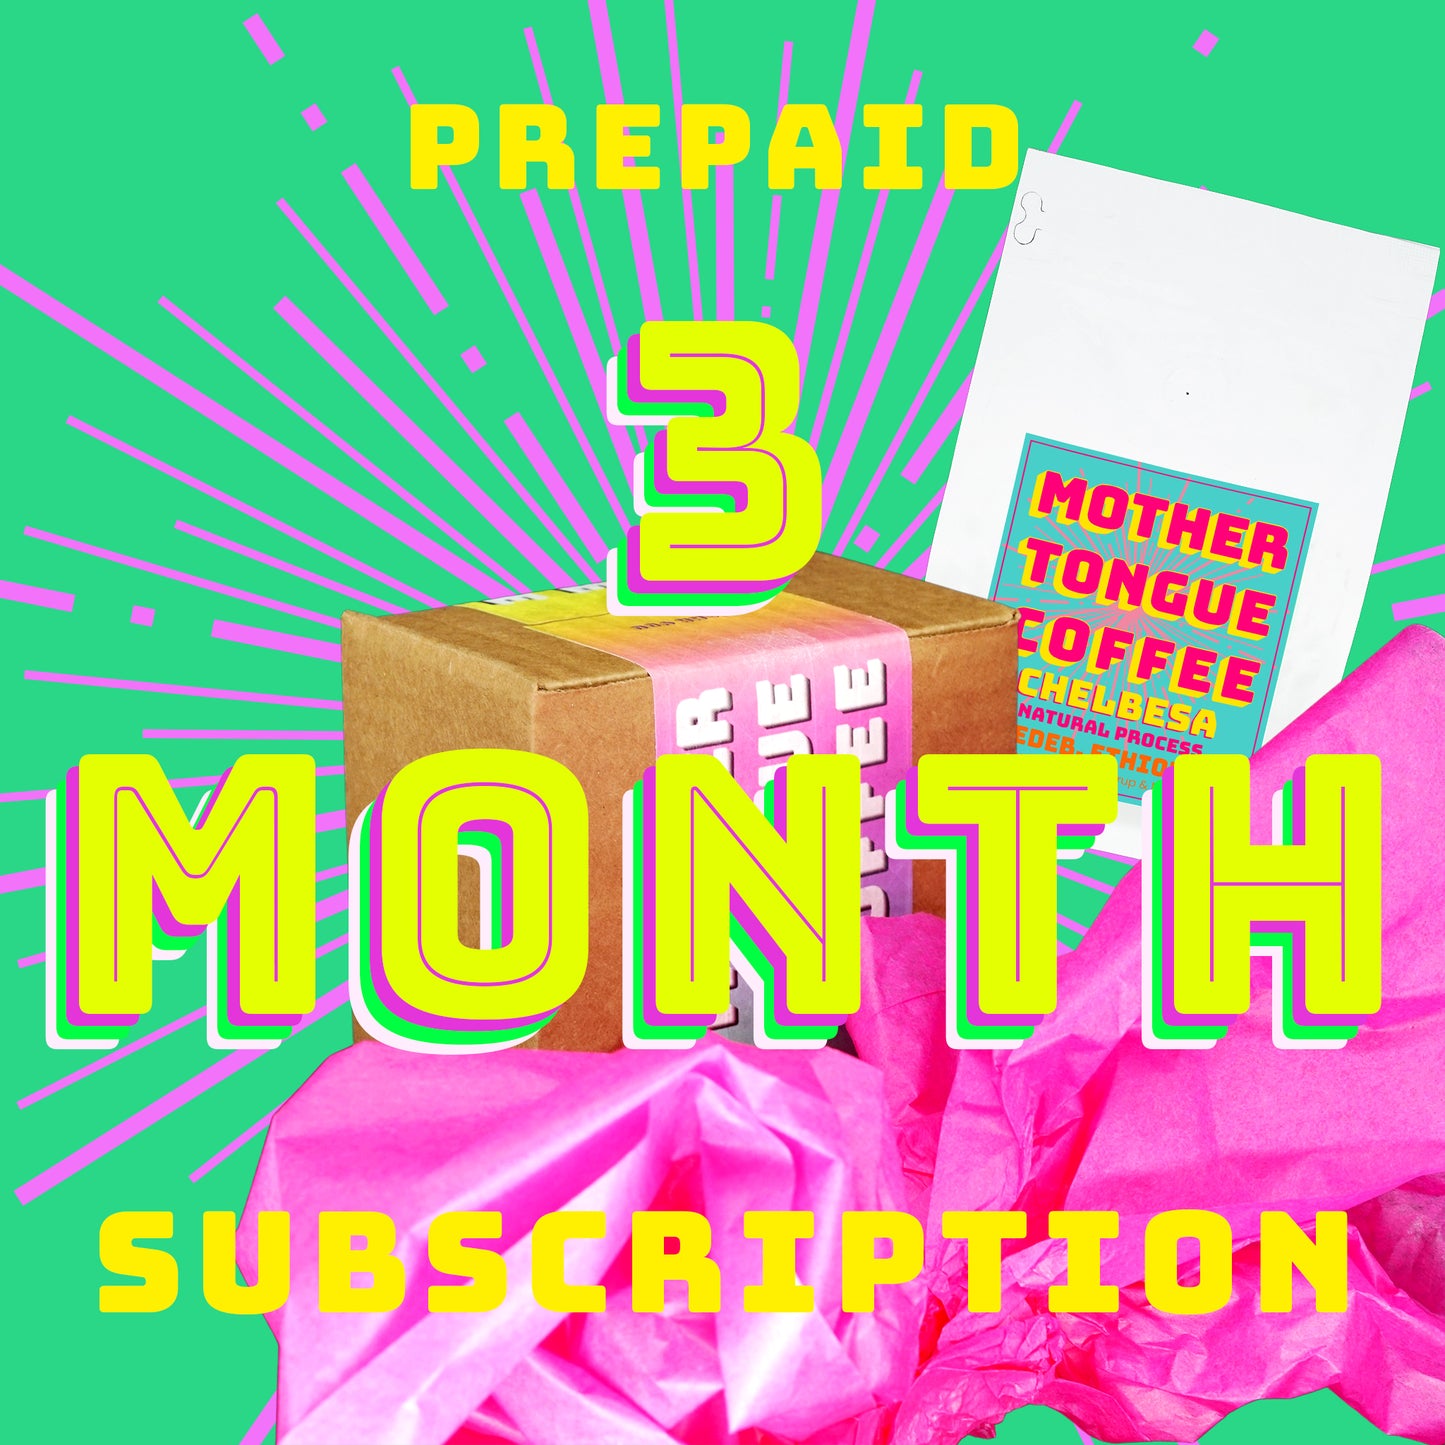 3 MONTH SUBSCRIPTION - prepaid - Mother Tongue Coffee